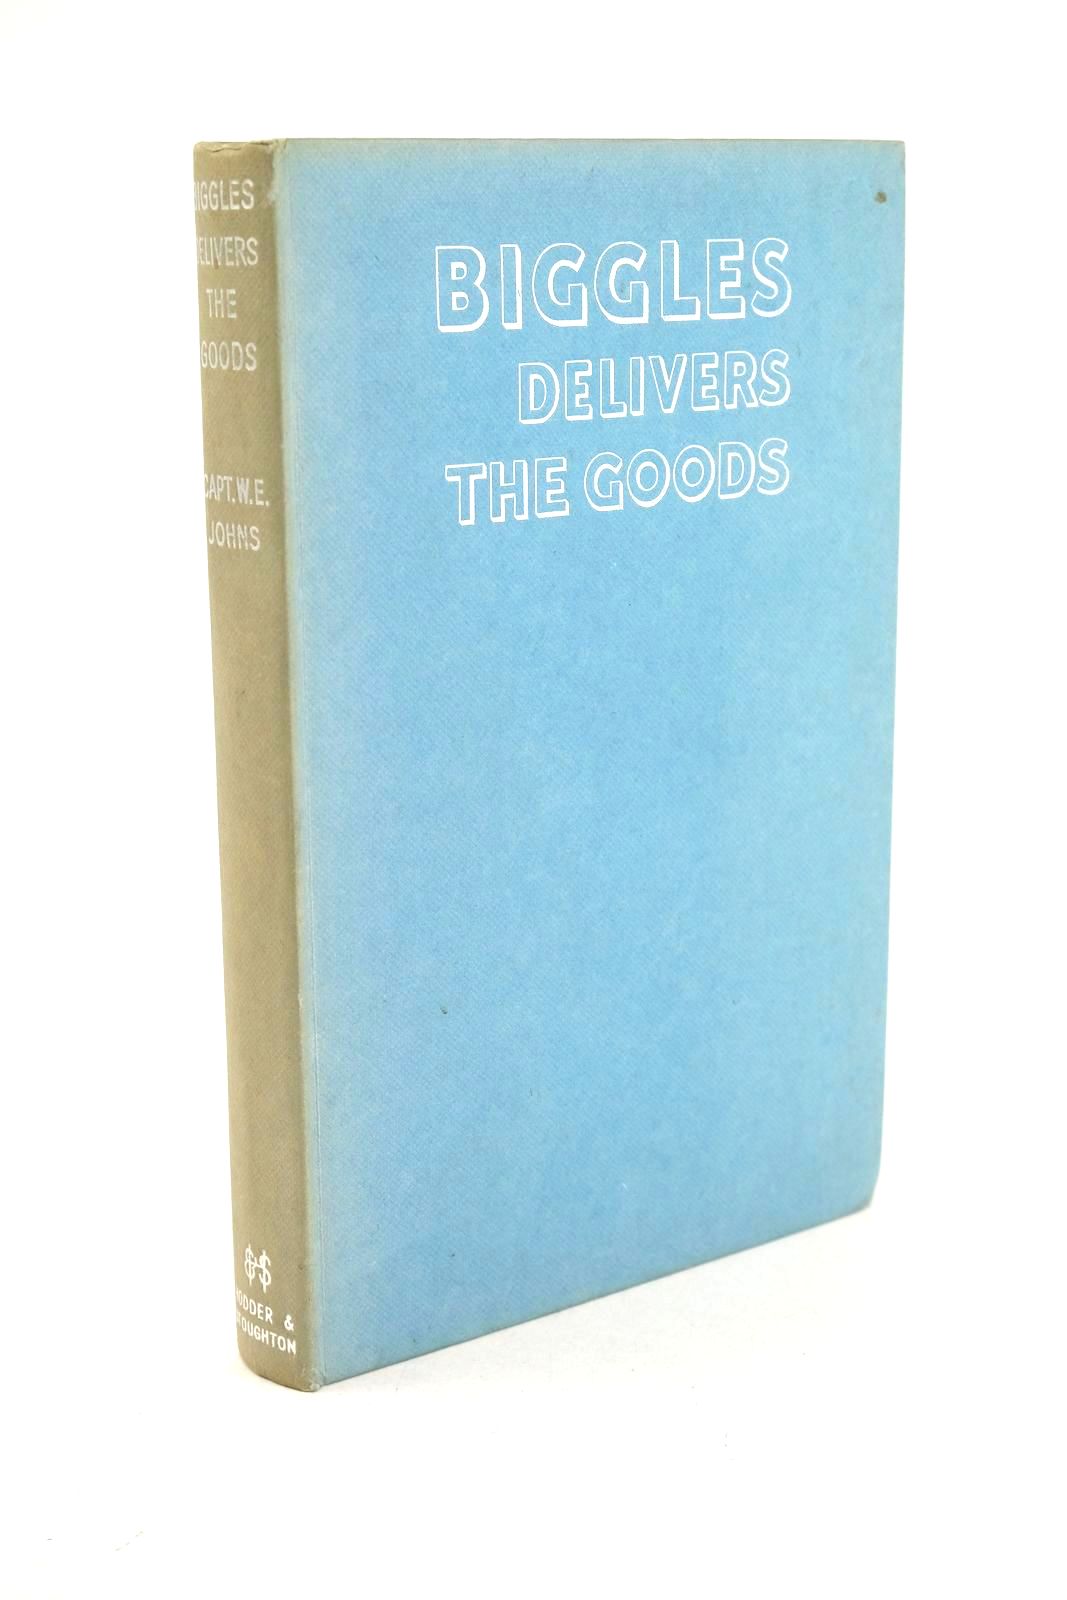 Photo of BIGGLES DELIVERS THE GOODS written by Johns, W.E. illustrated by Stead, Leslie published by Hodder &amp; Stoughton (STOCK CODE: 1327207)  for sale by Stella & Rose's Books